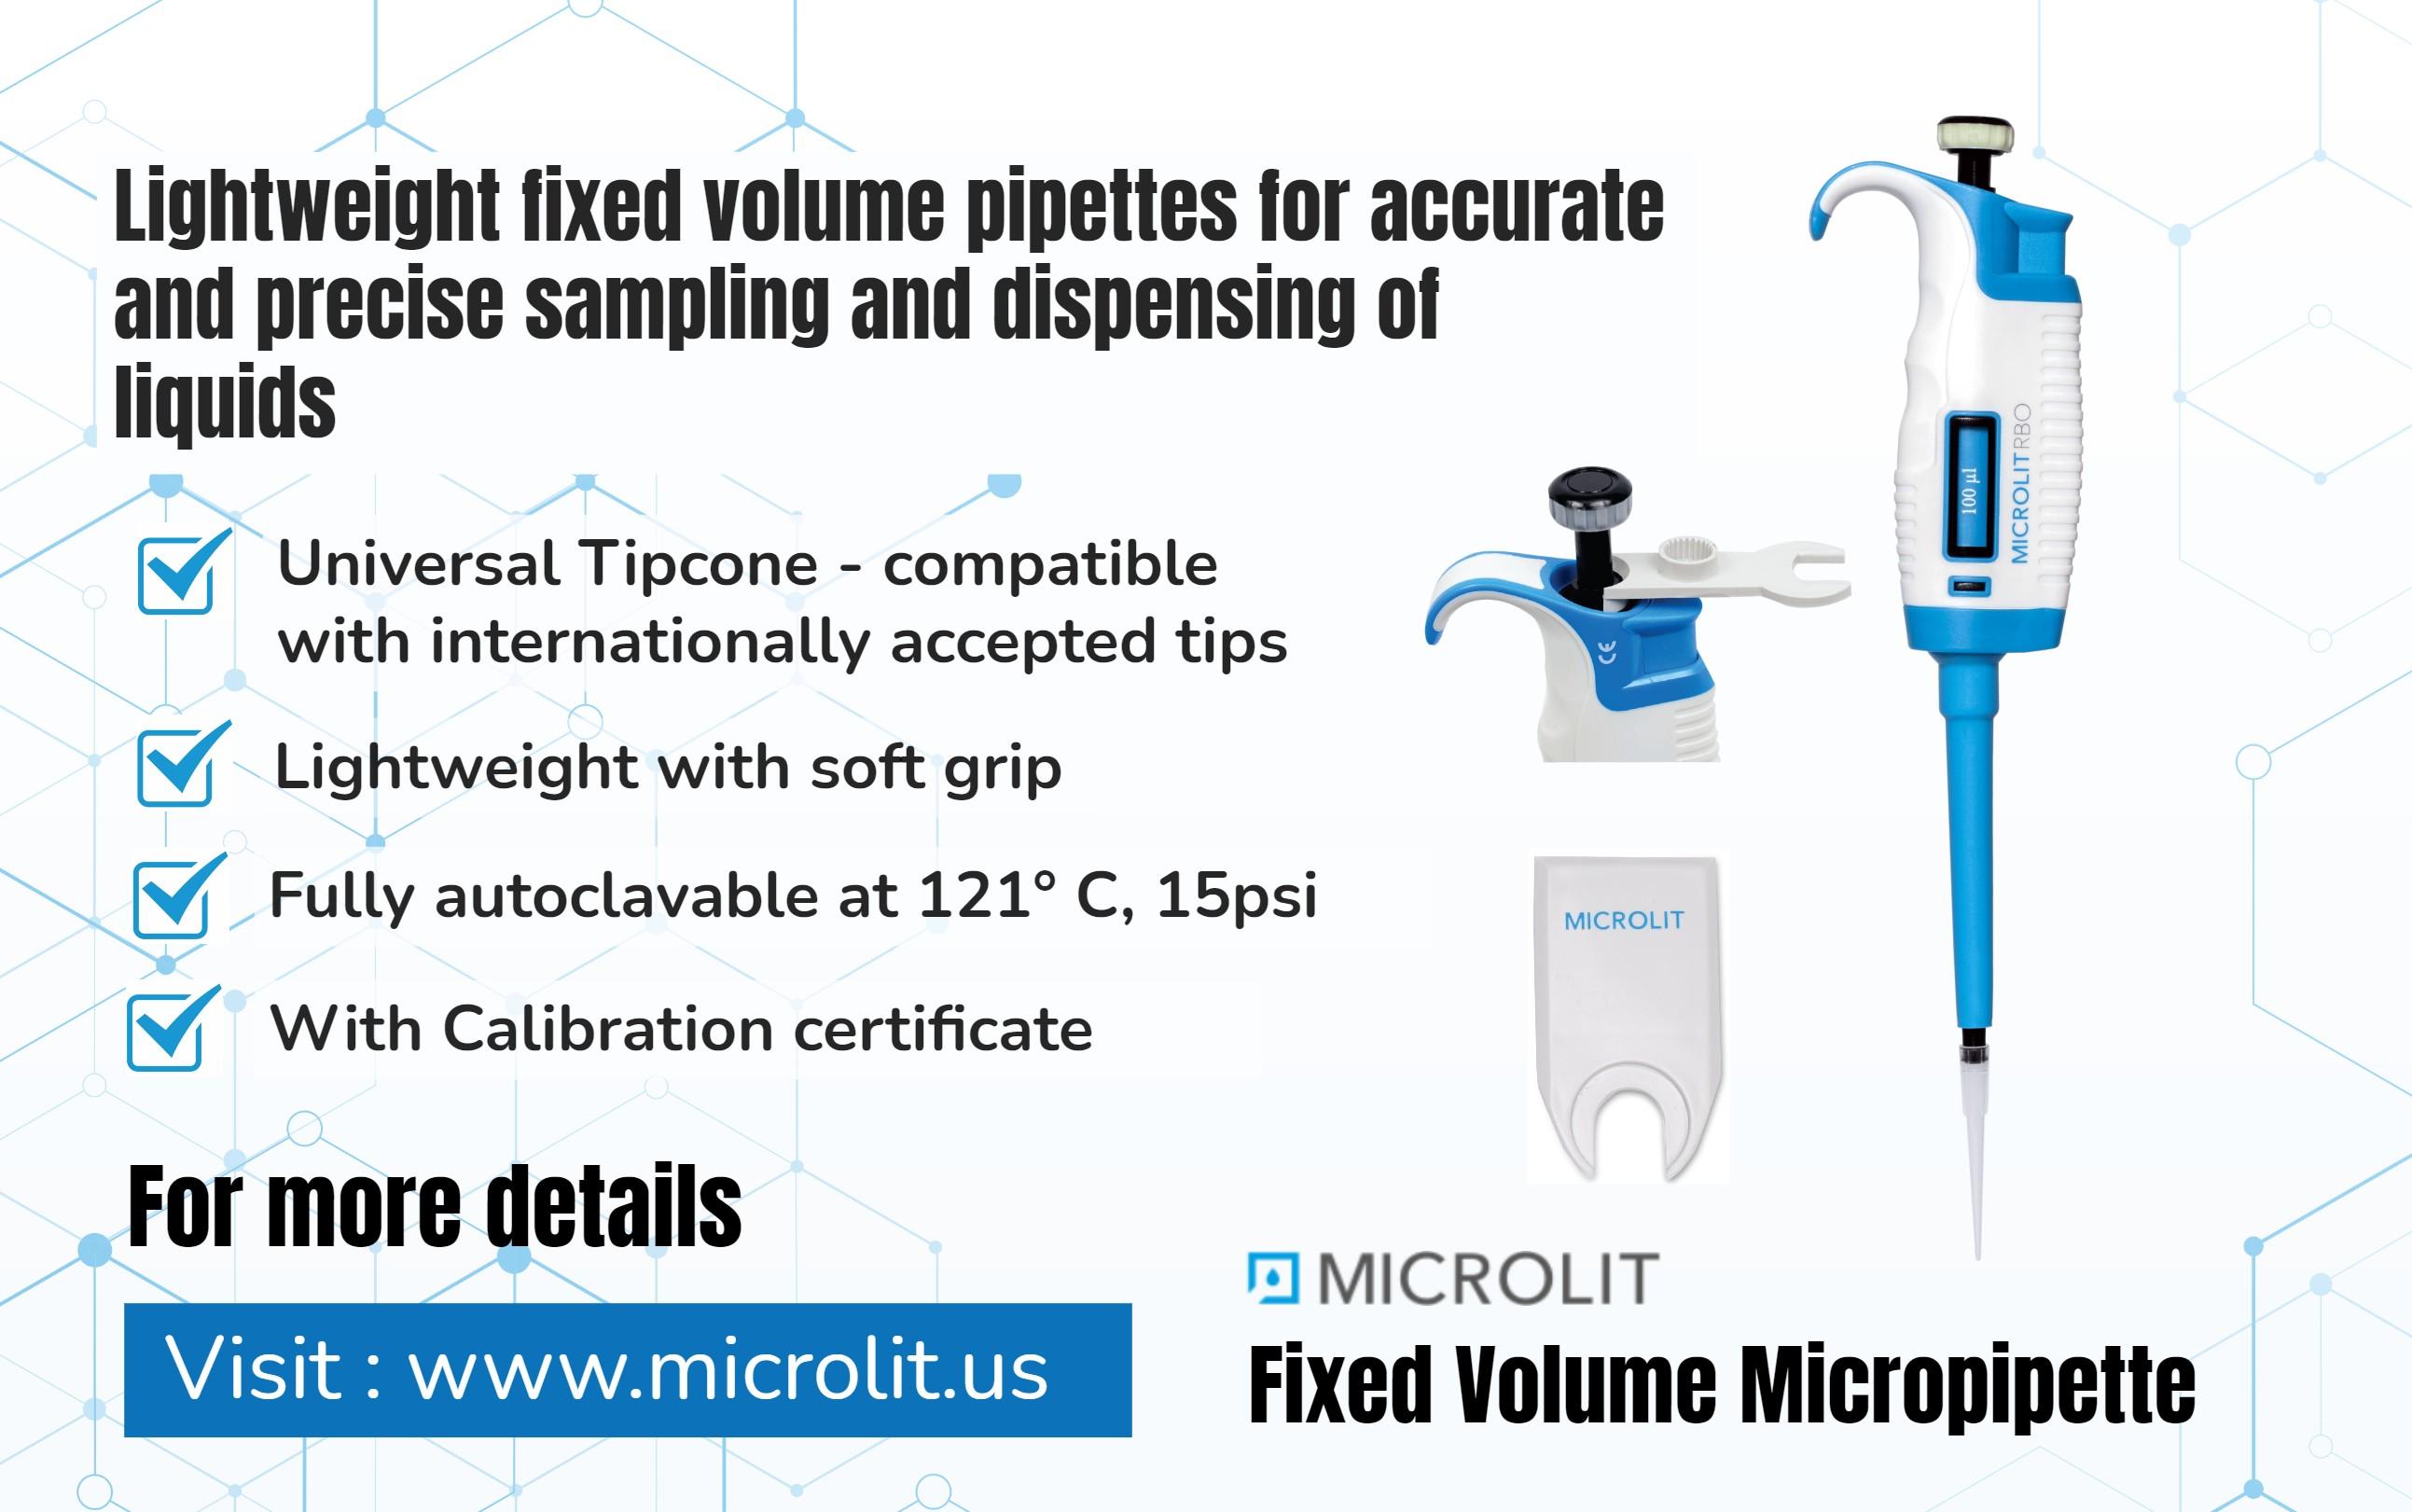 Image - Microlit offers the standard quality #FixedVolumePipette for accurate and precise sampling and dispensing of ...